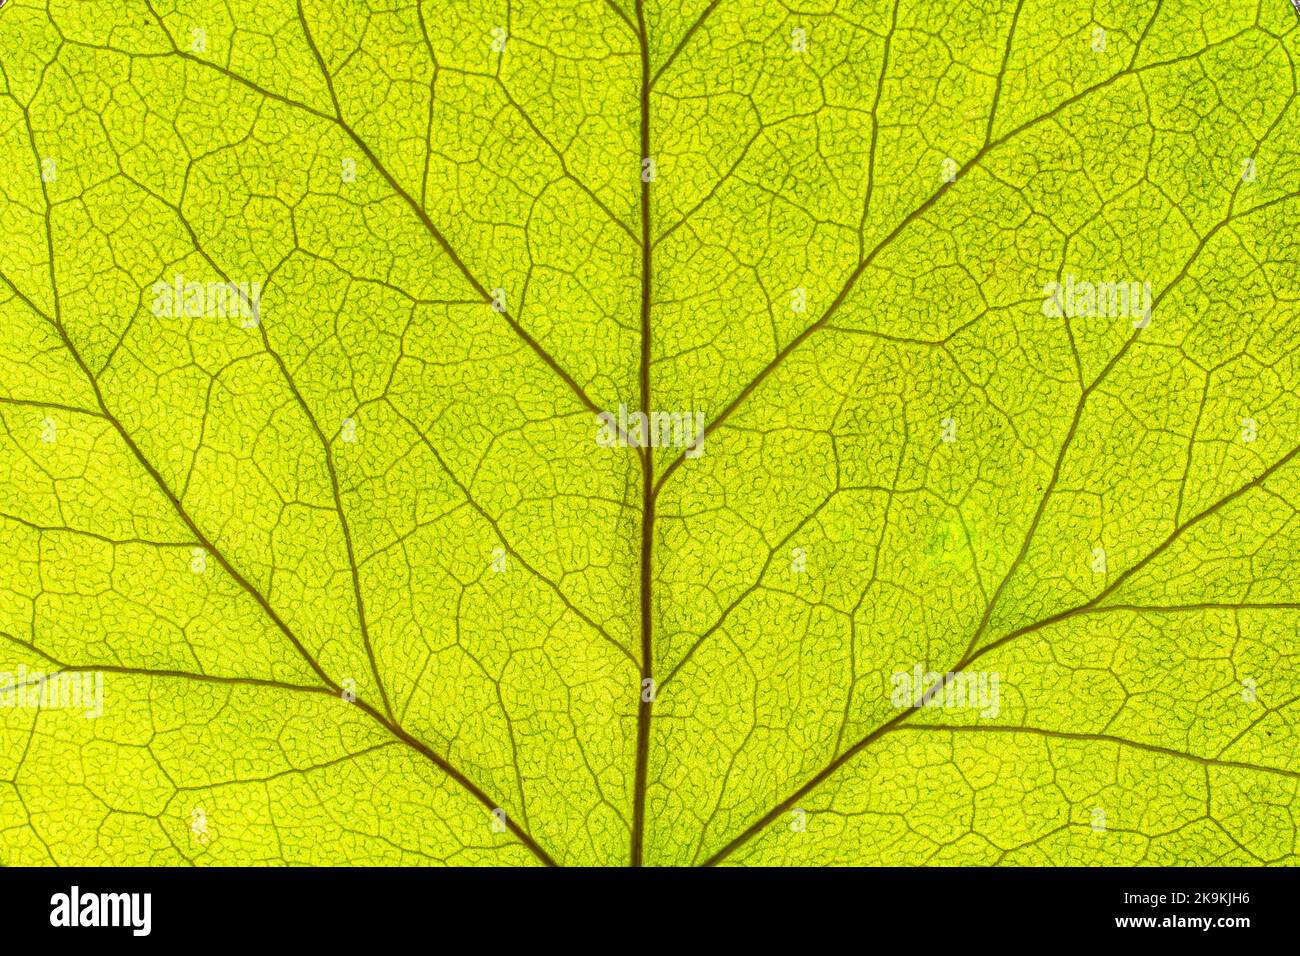 Close up detail of a beautiful backlit green leaf showing veins and cellular structure patterns. Stock Photo